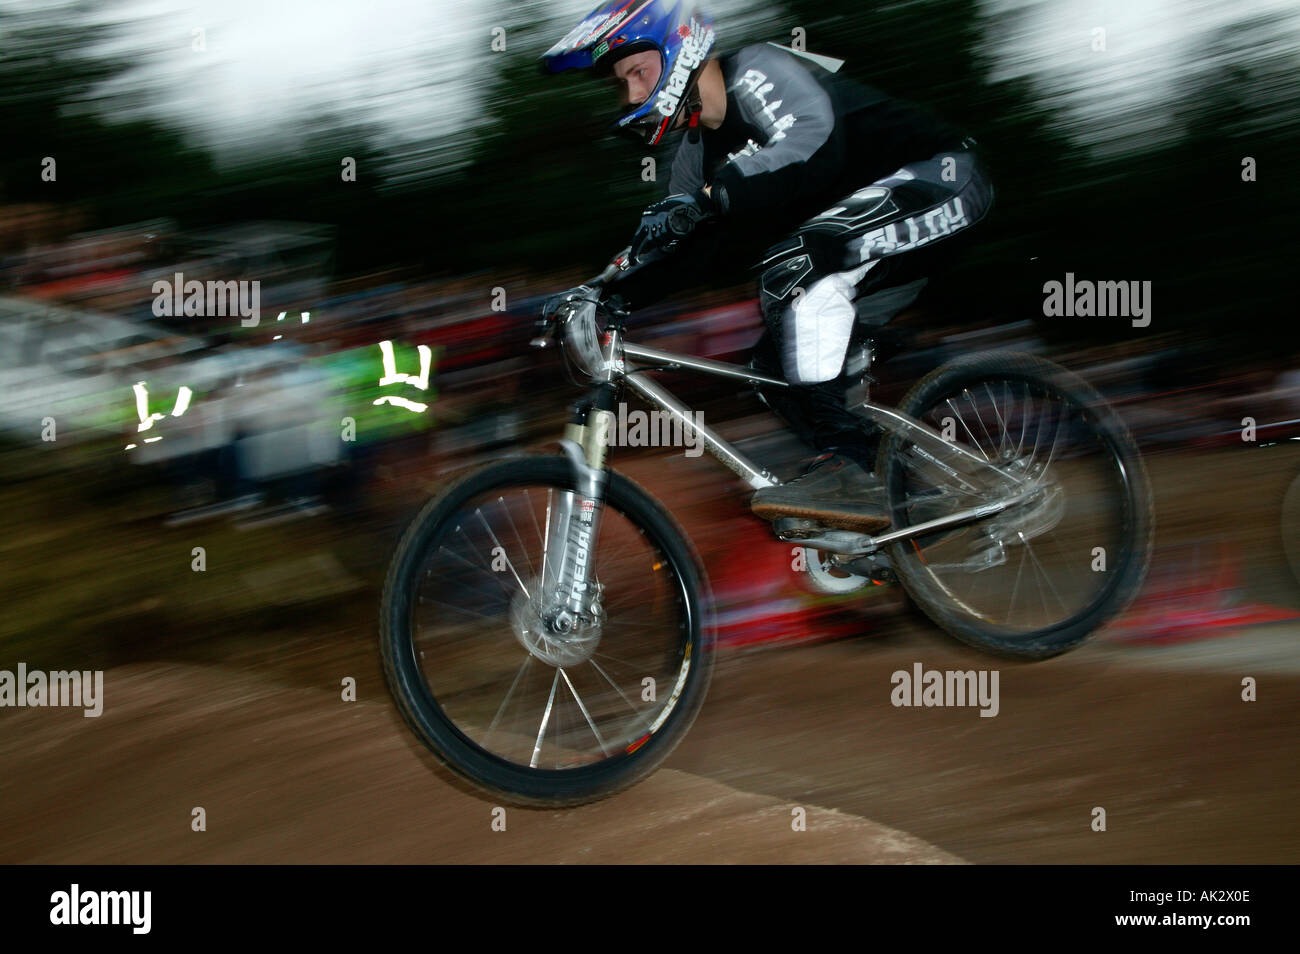 Mountain Bike rider competing in World Cup Race in Fort William Scotland Stock Photo